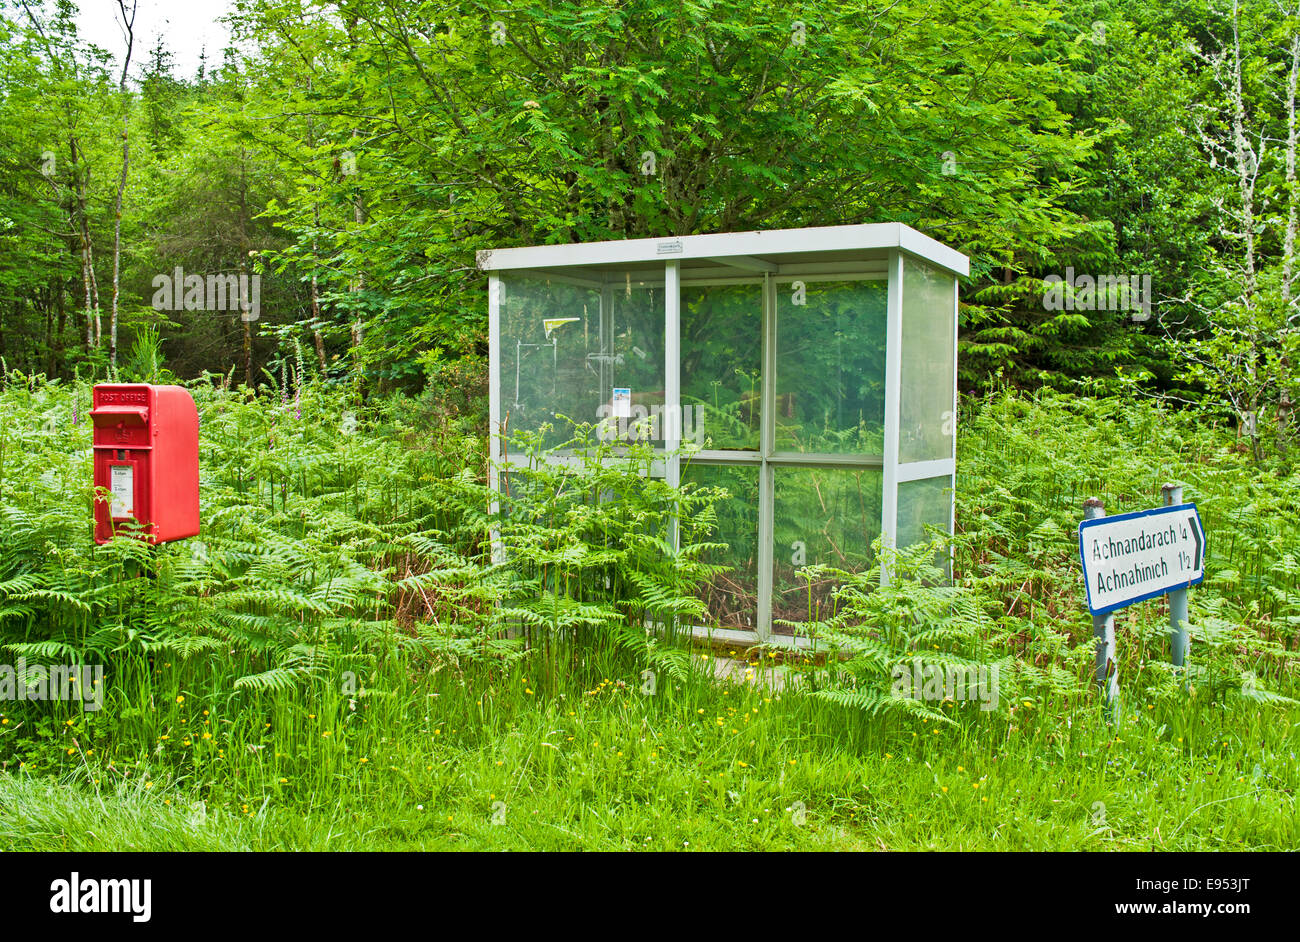 Post box and shabby little-used bus shelter surrounded by tall bracken and grass at road junction in woodland near Plockton Stock Photo